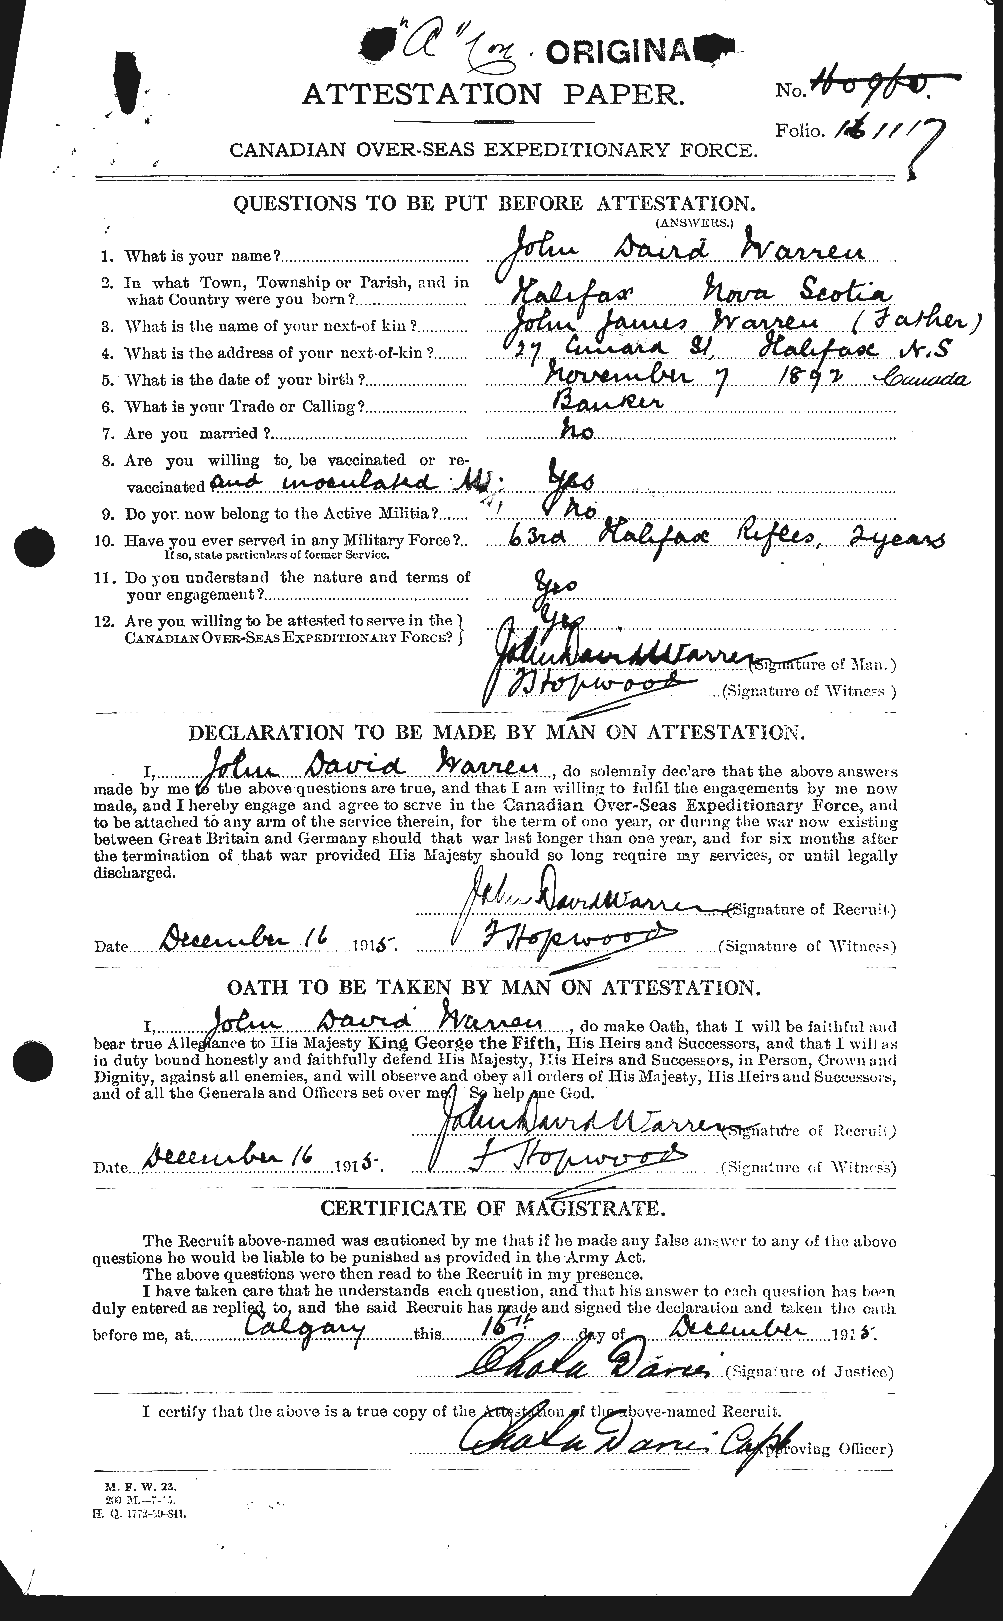 Personnel Records of the First World War - CEF 658548a